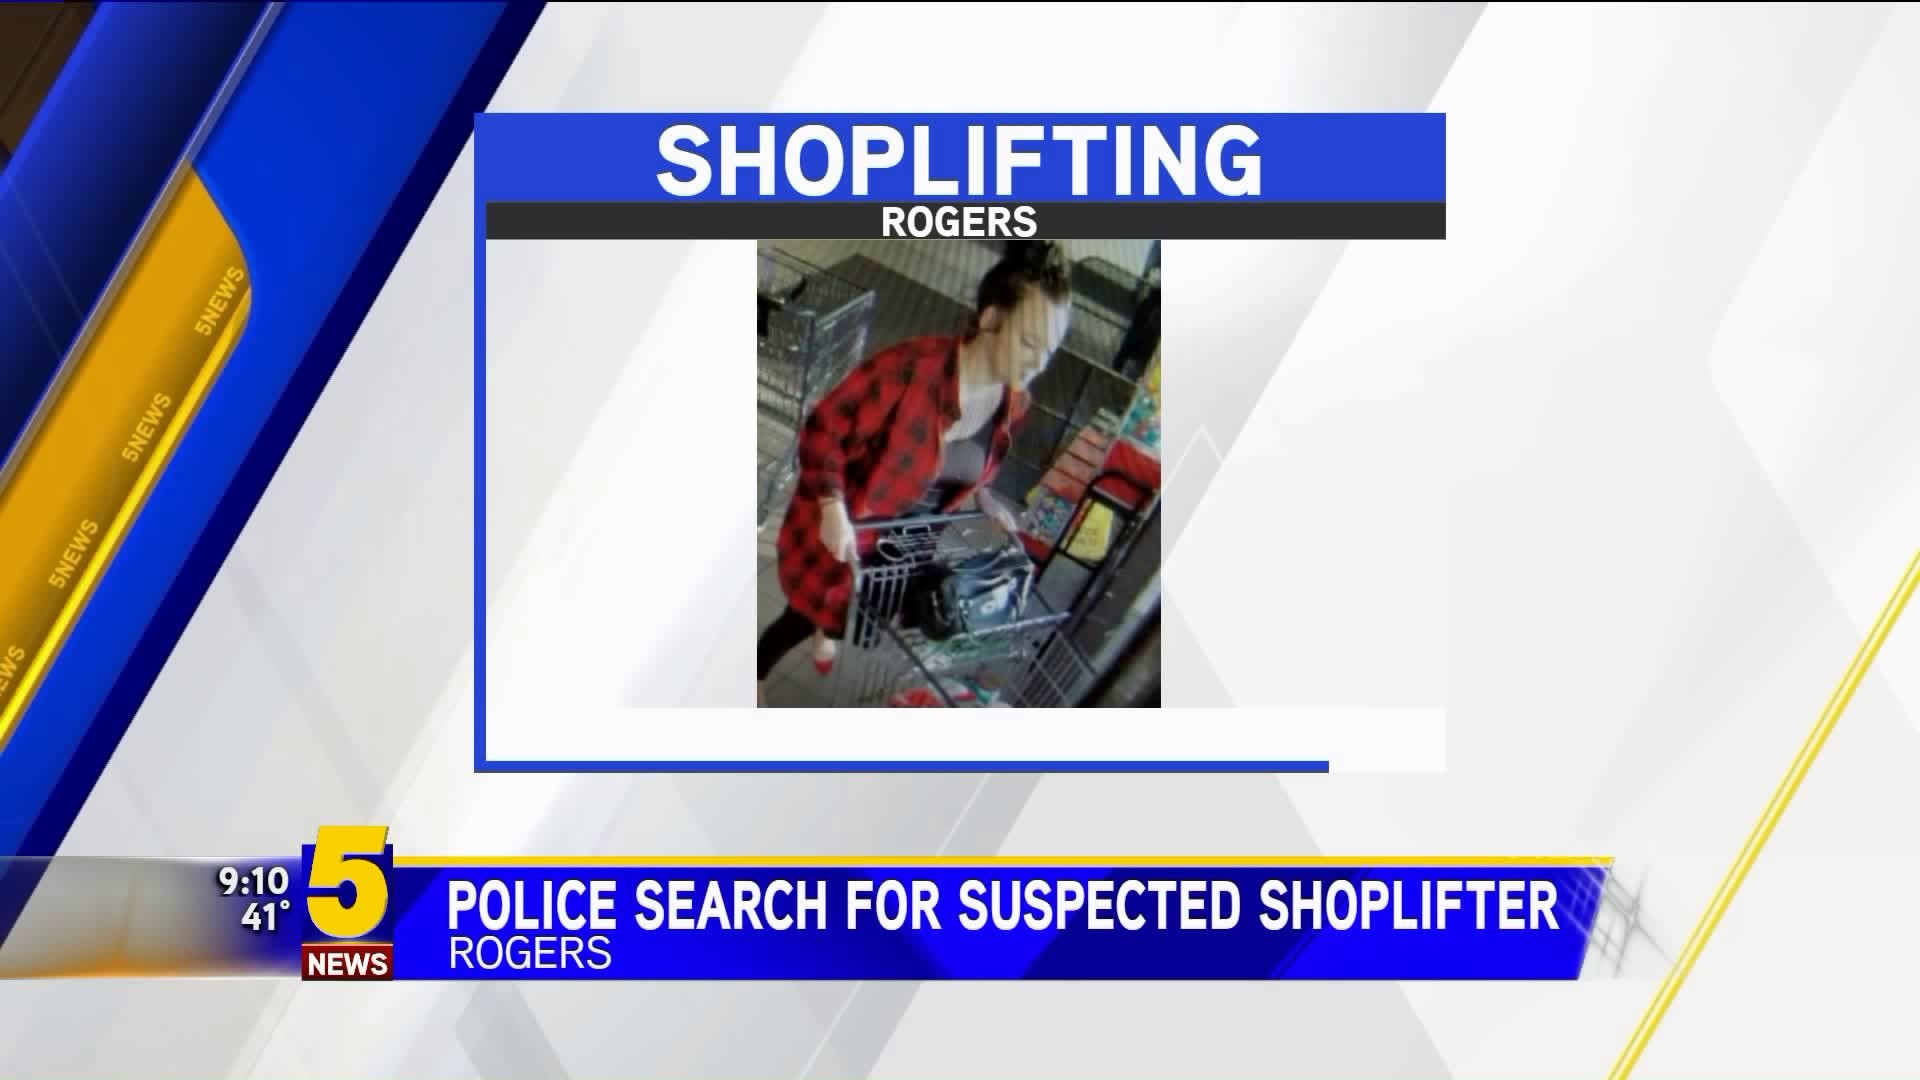 Rogers Police Ask For Help In Identifying Suspected Shoplifter